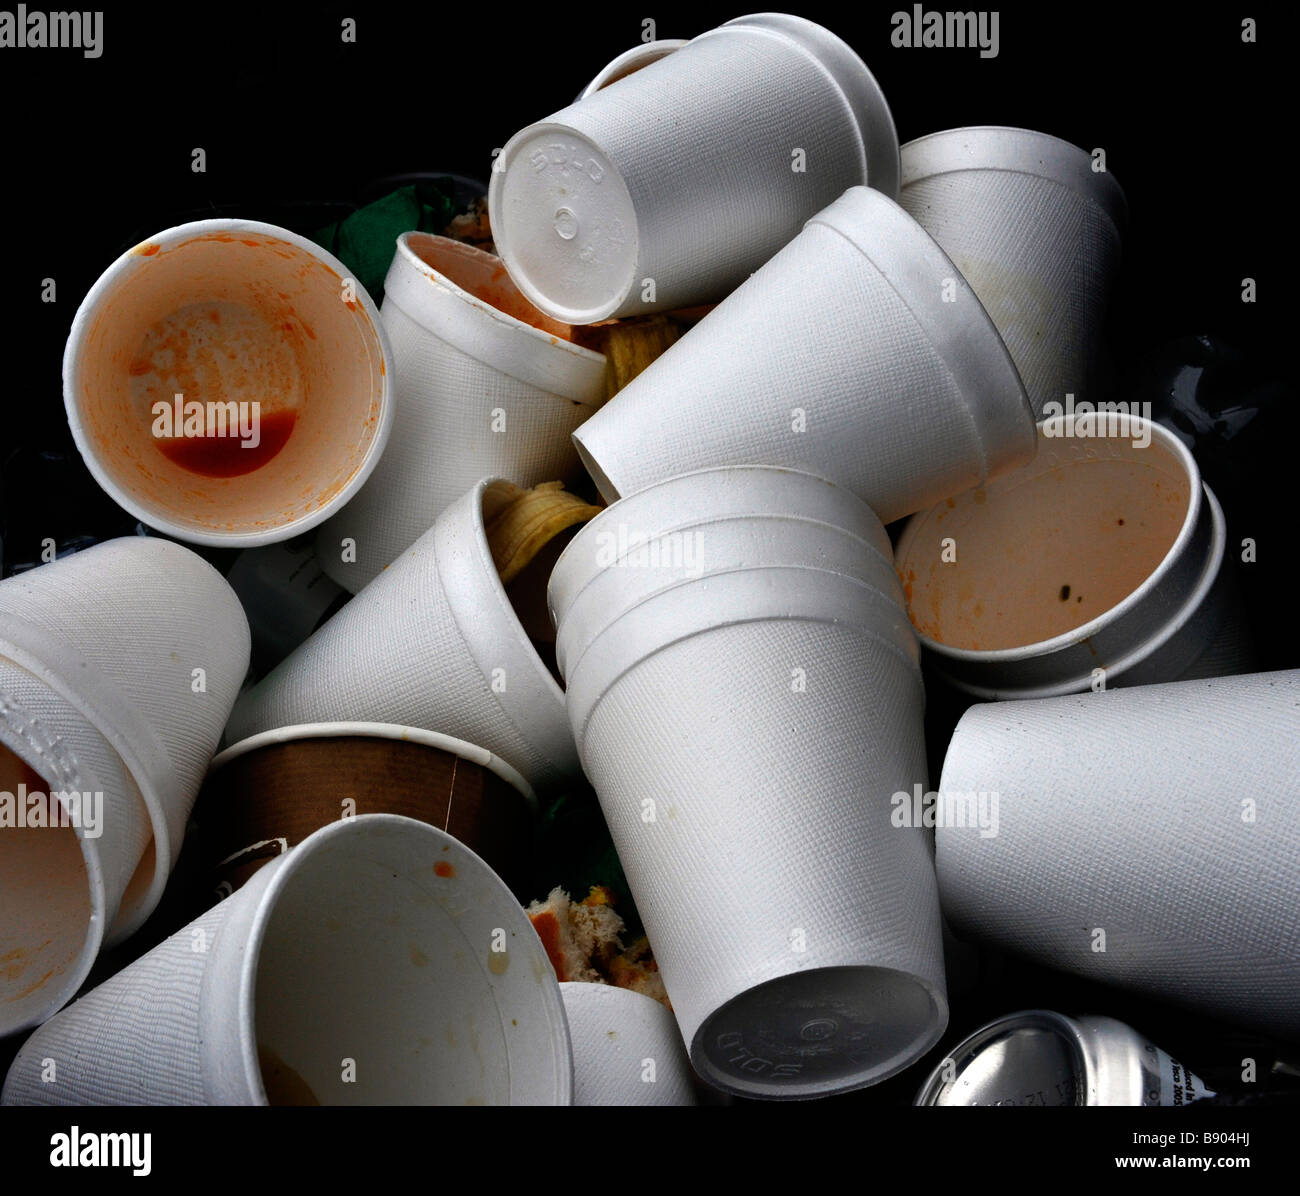 digarded polystyrene drinking cups in rubbish bin Stock Photo